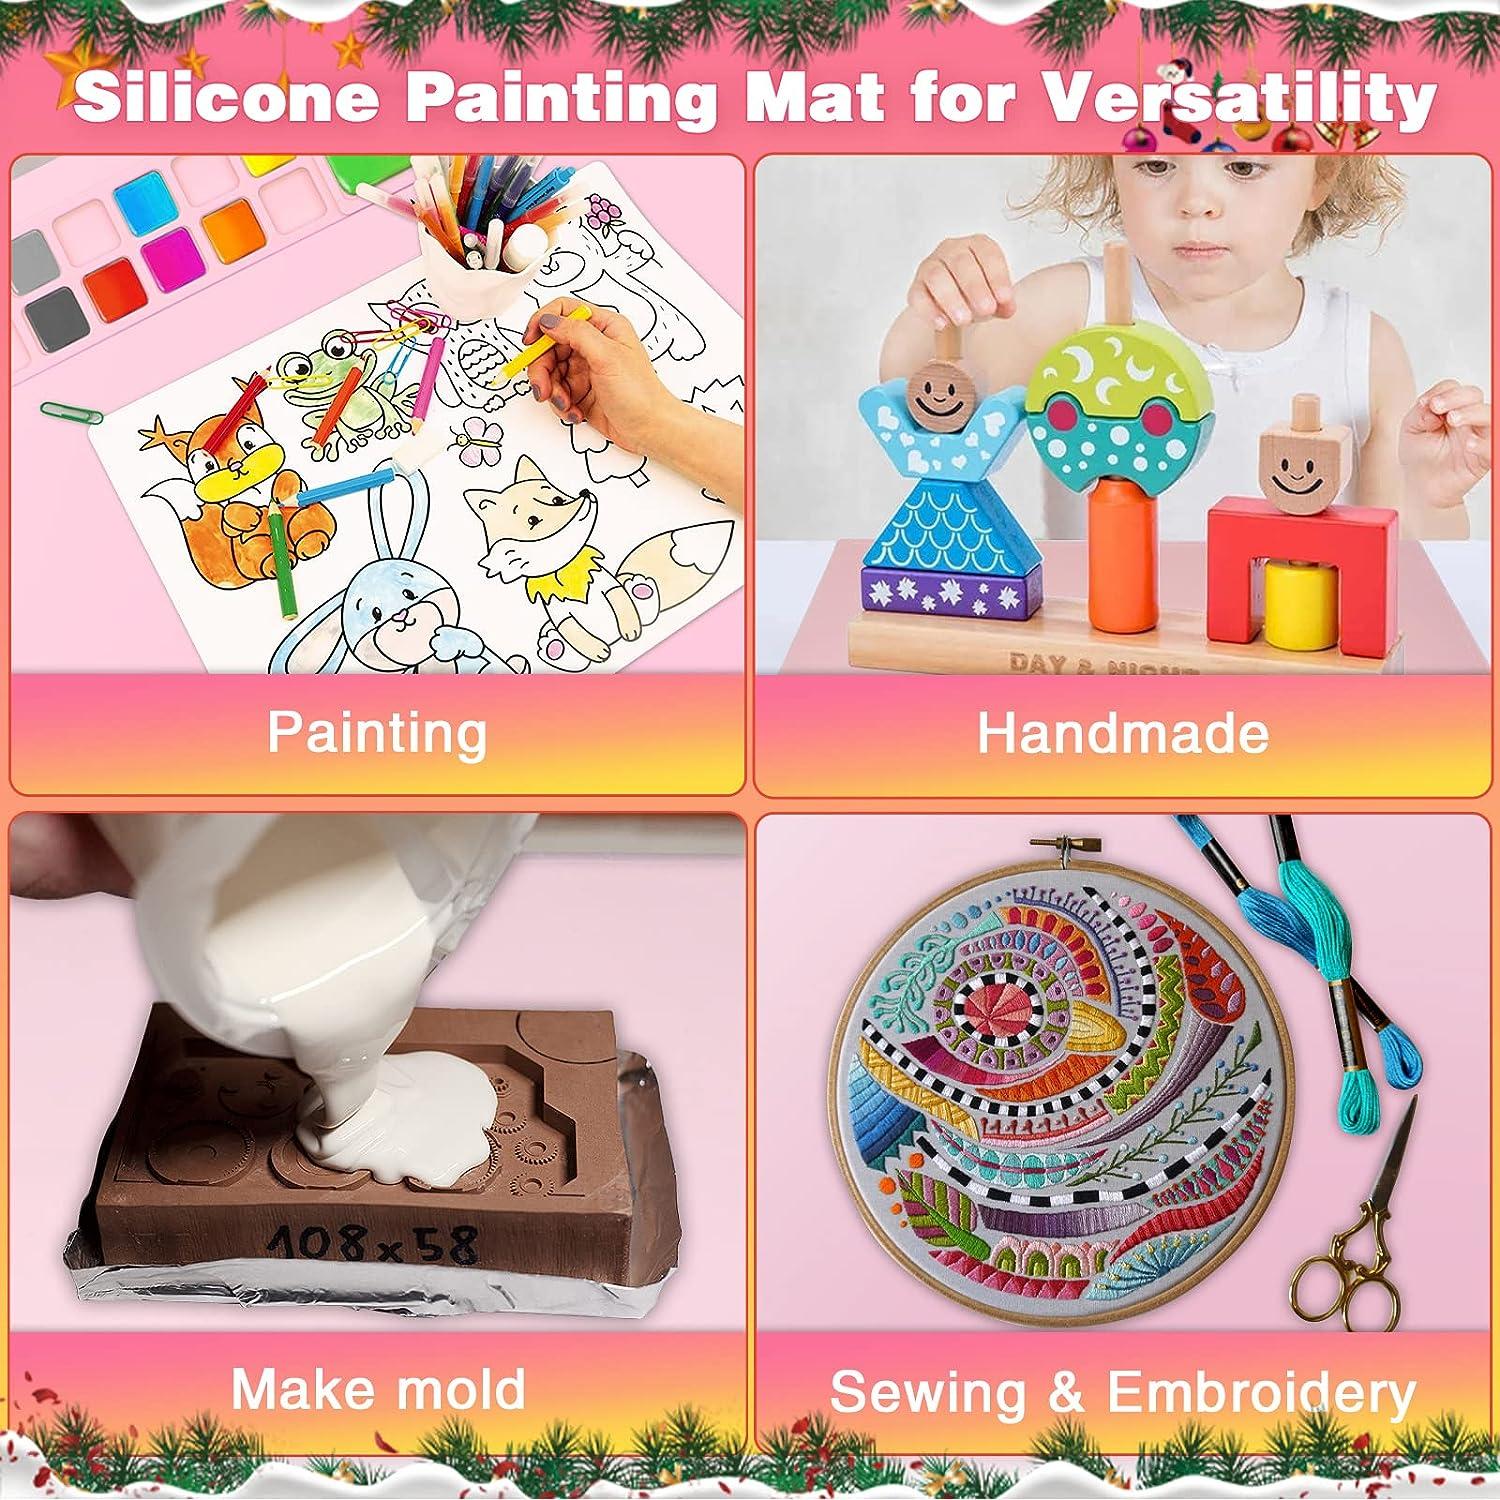 Silicone Painting Mat, Silicone Mat for Resin Casting, 20x16 Non-Stick  Silicone Sheet, Silicone Craft Mat with Cleaning Cup for Painting, Art,  Handmade, Make Mold, and DIY Creations